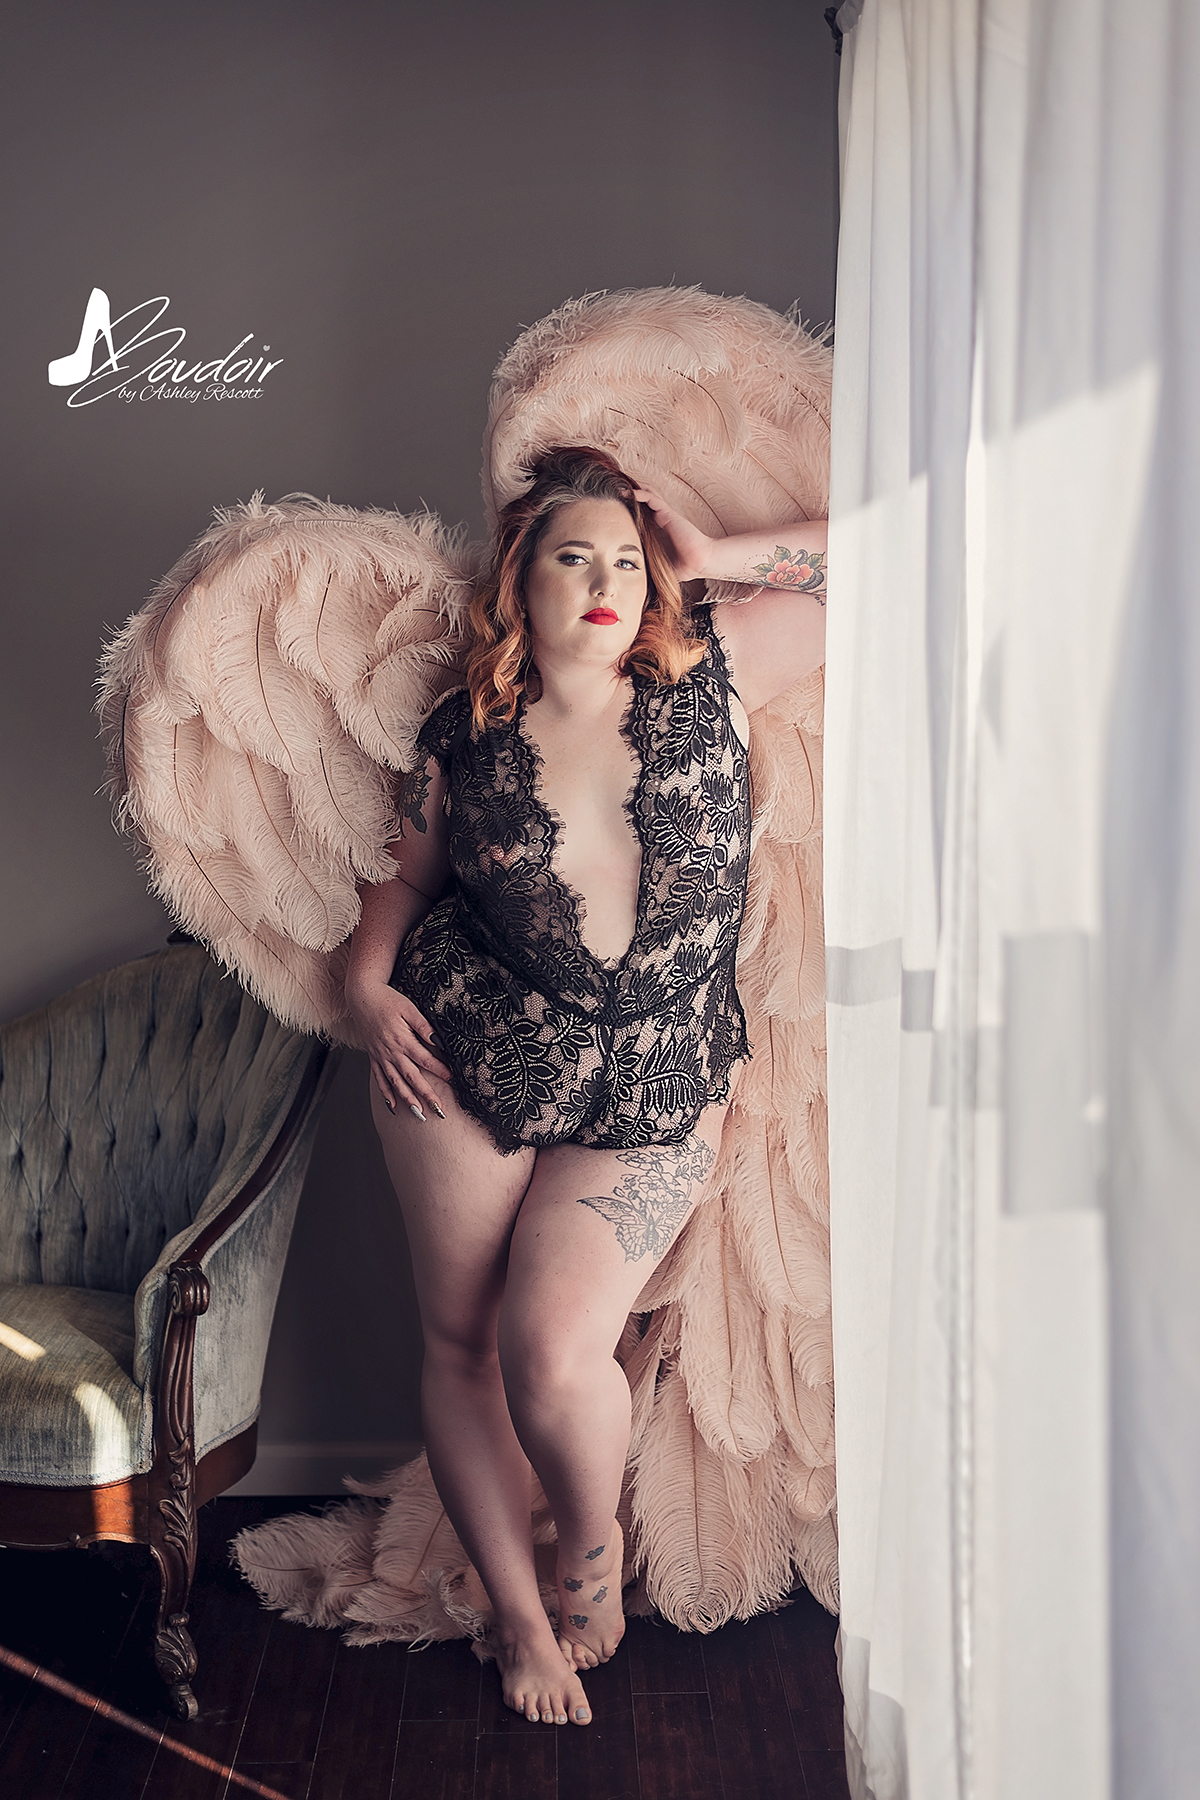 curvy model in lingerie and angel wings